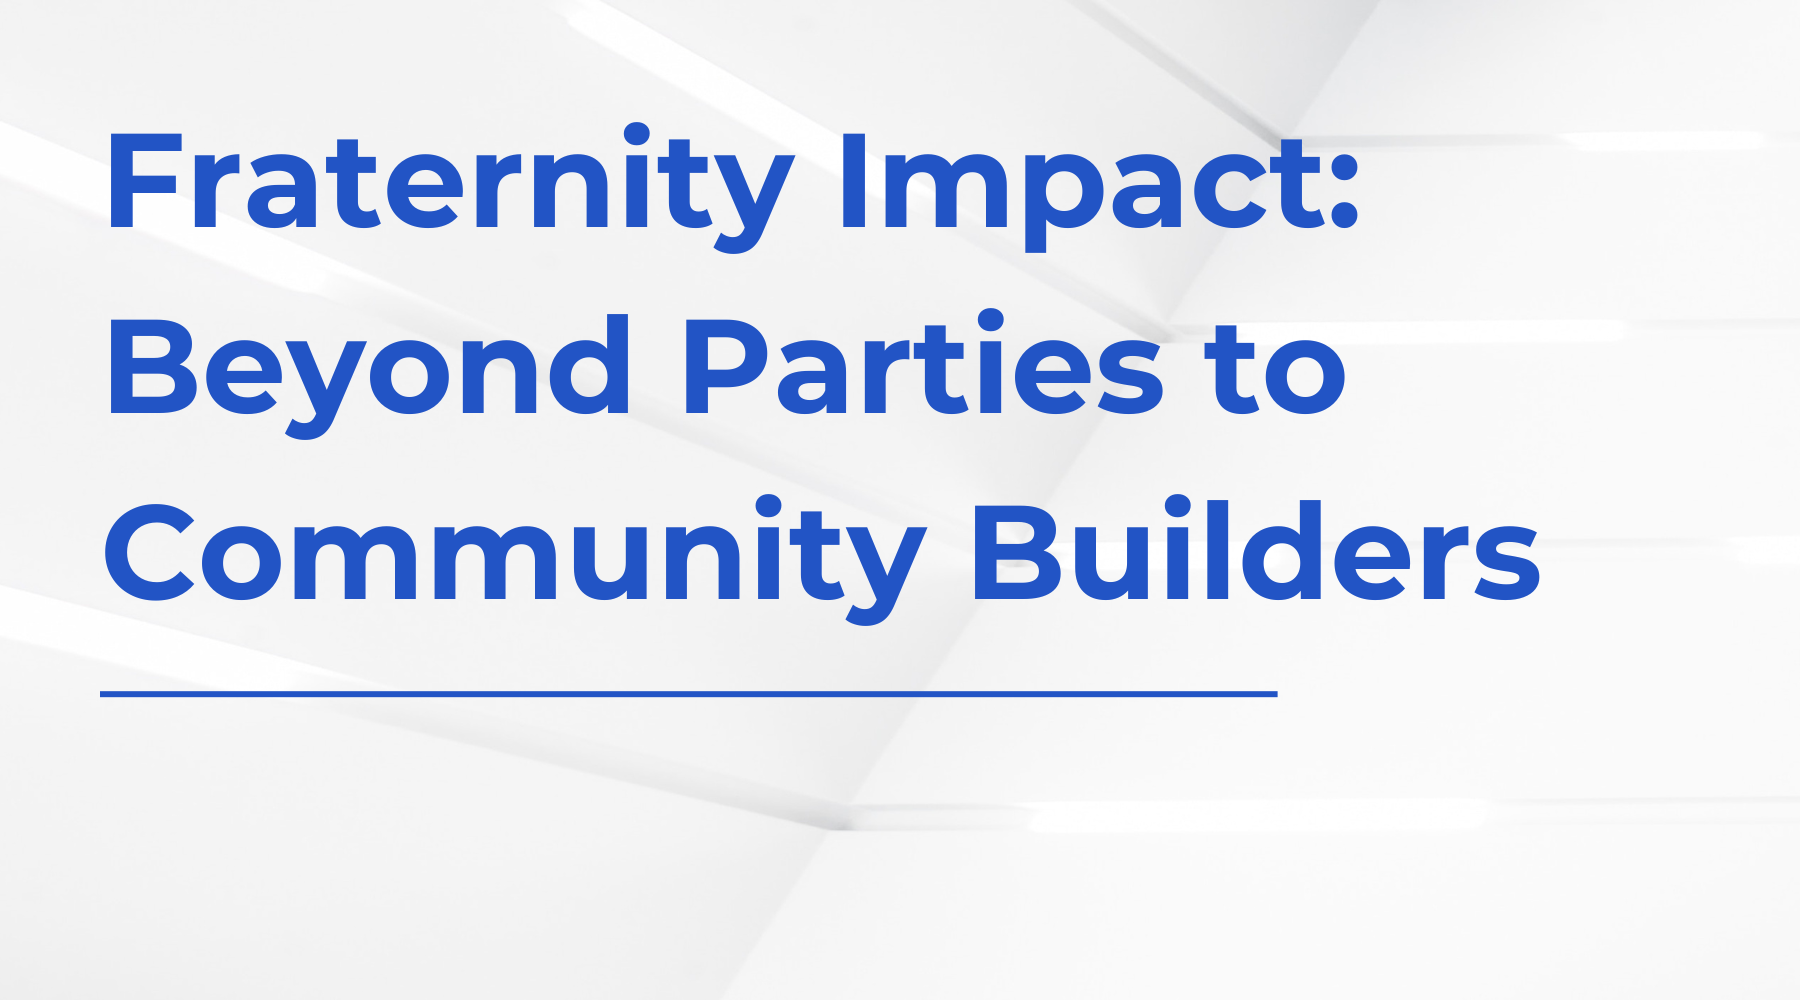 Fraternity Impact: Beyond Parties to Community Builders